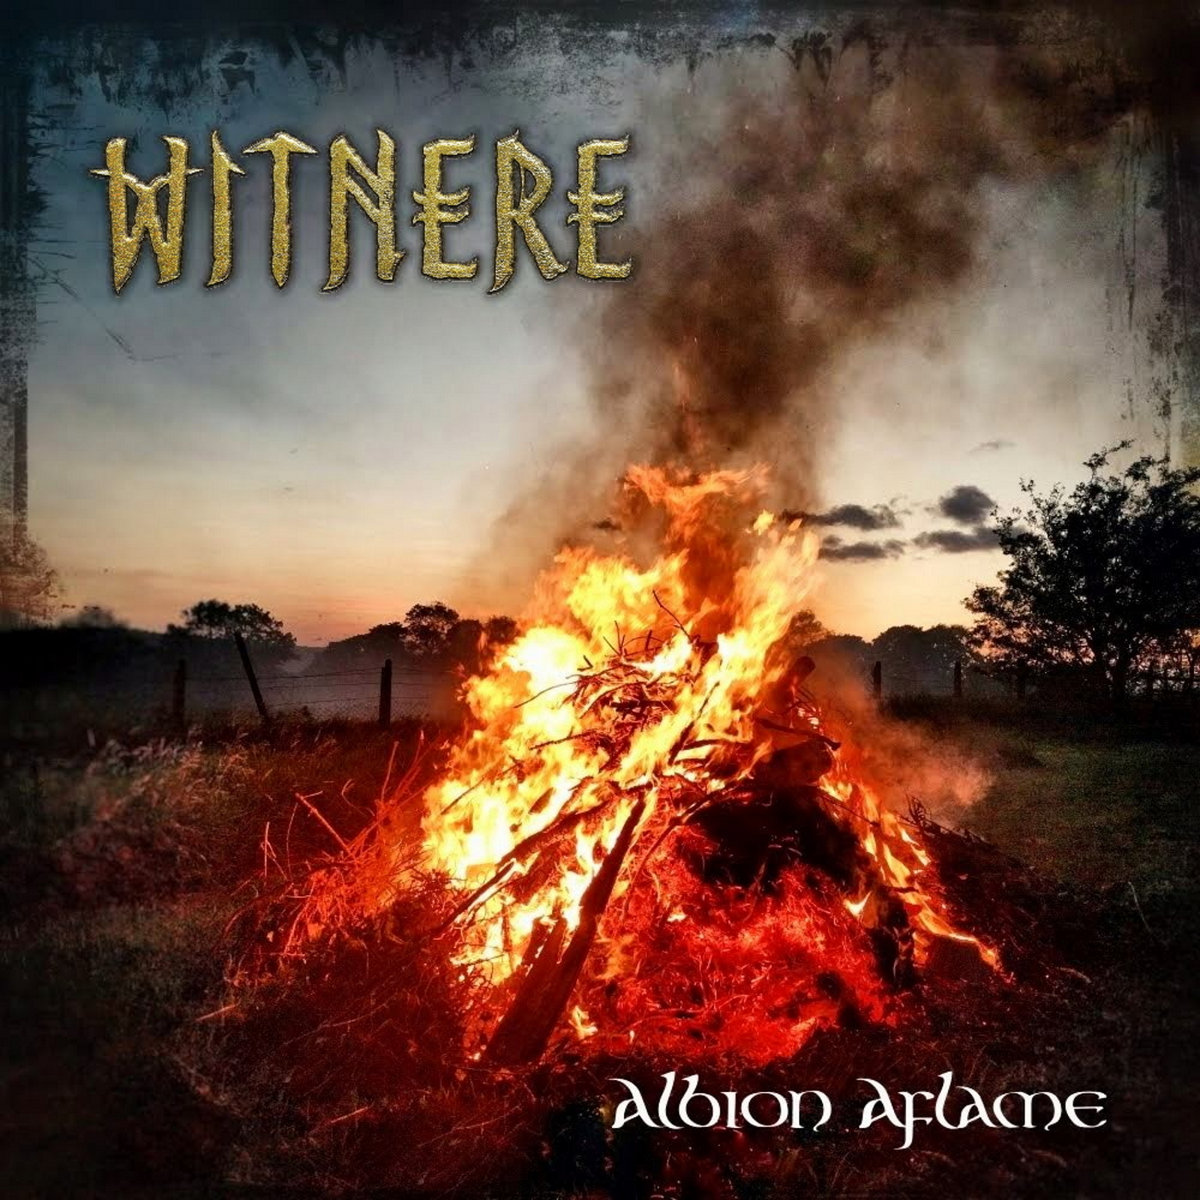 Witnere – Albion Aflame